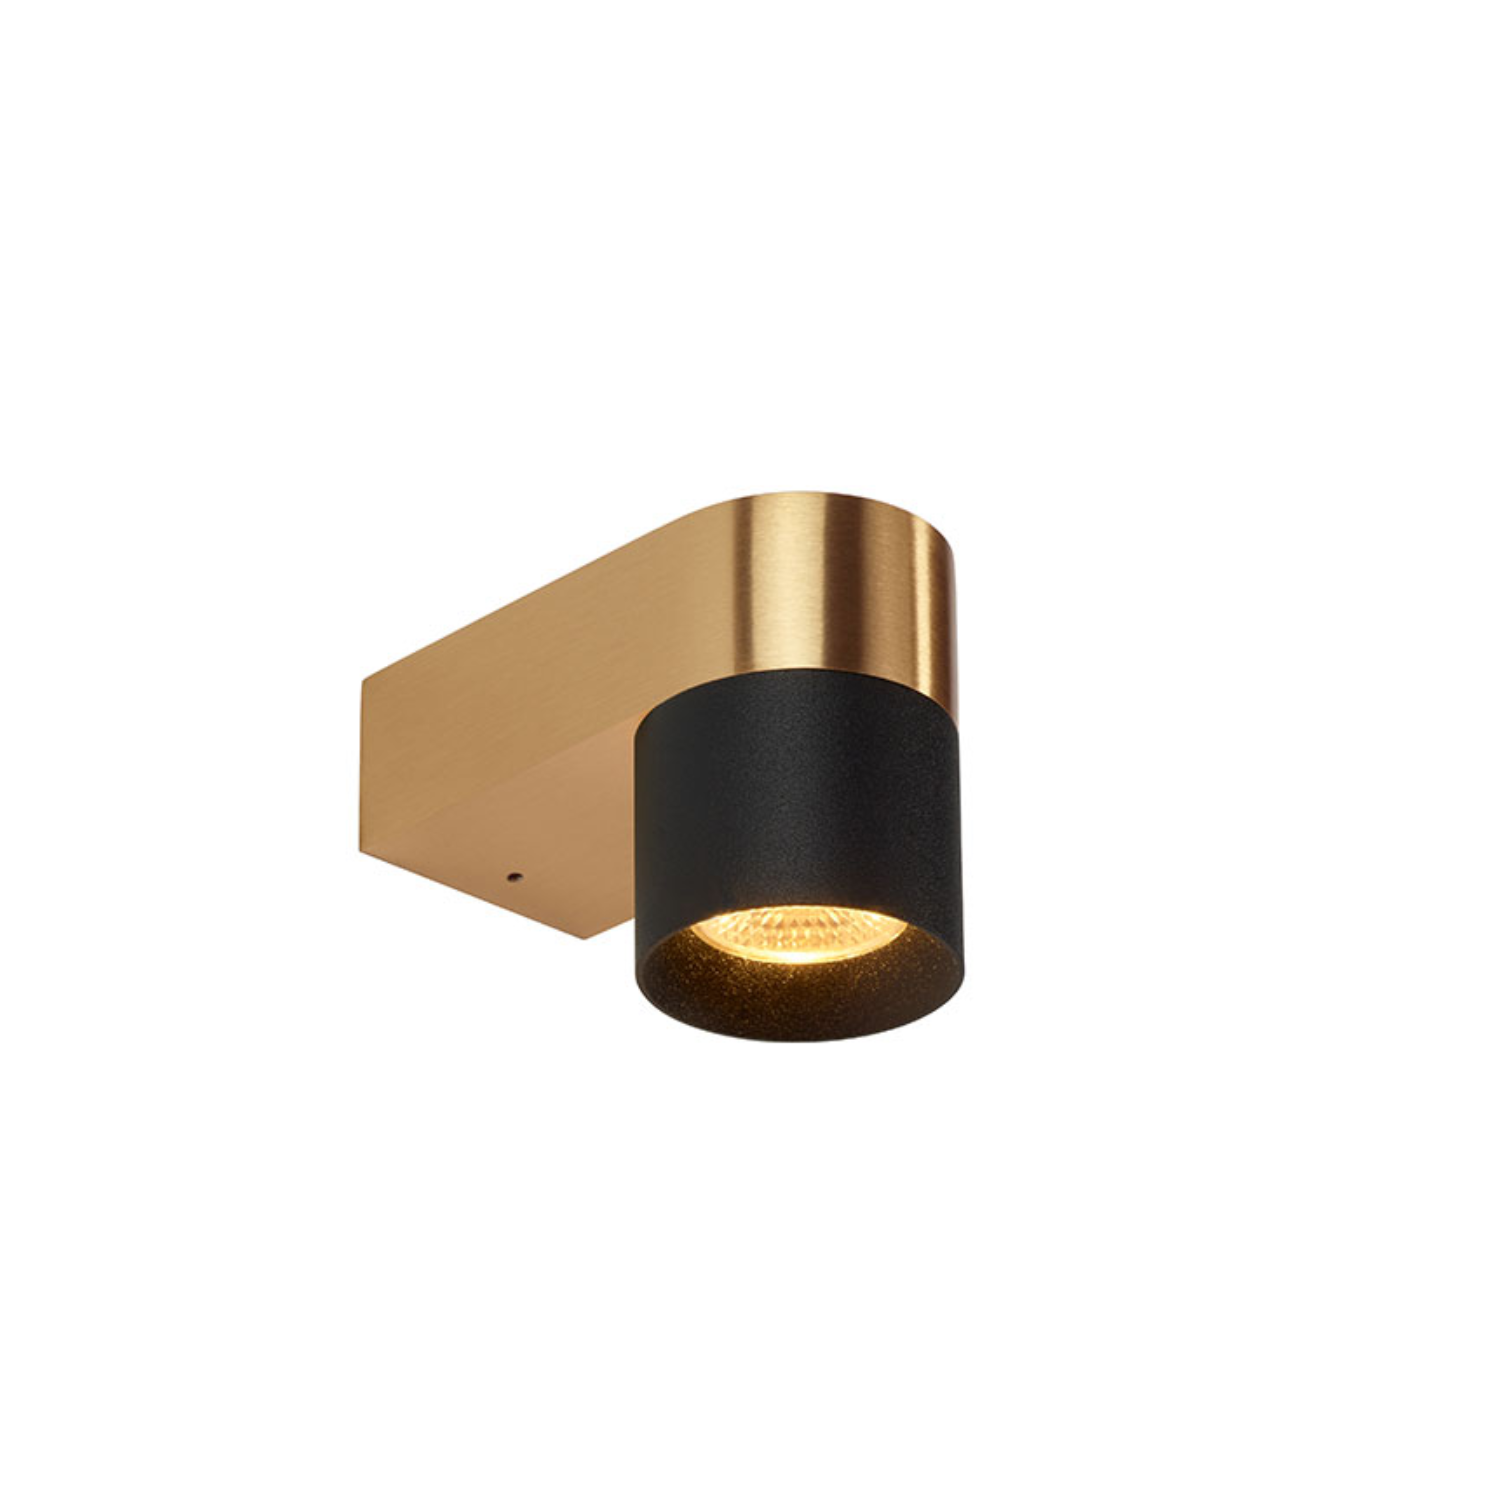 AUDY-WALL 1S DUO - Wall Light